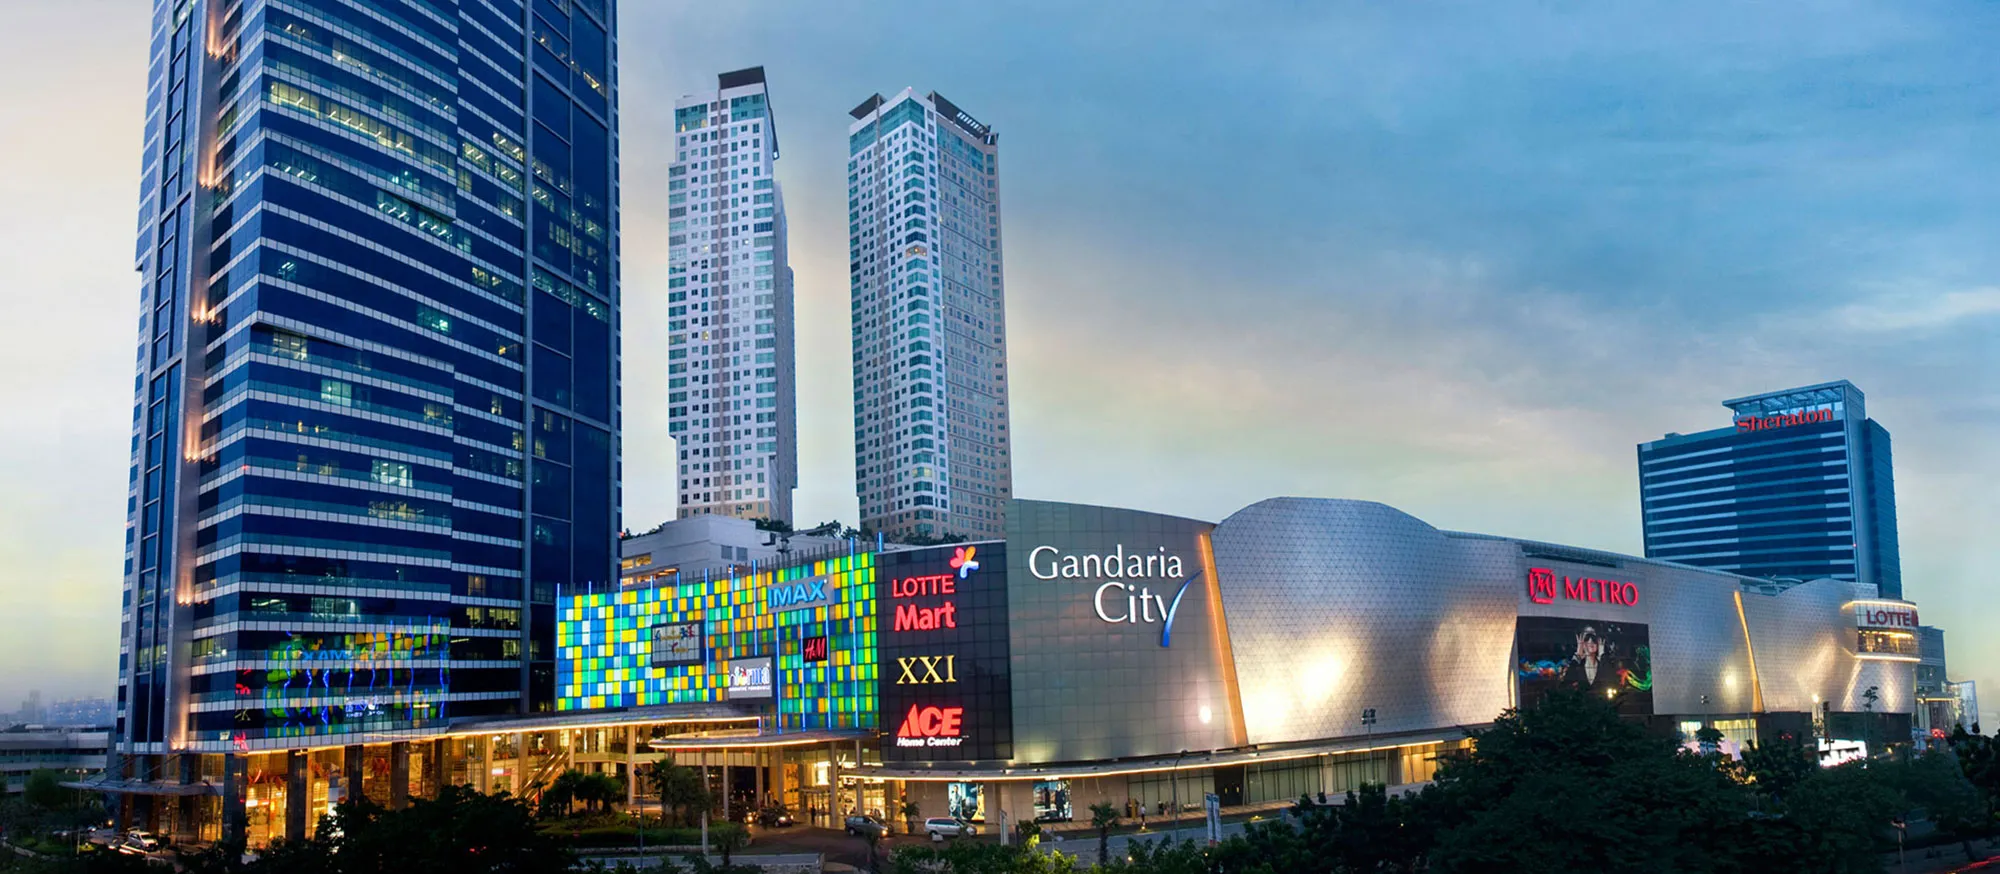 Gandaria City in Indonesia, central_asia | Sporting Equipment,Handbags,Shoes,Clothes,Cosmetics,Watches - Country Helper